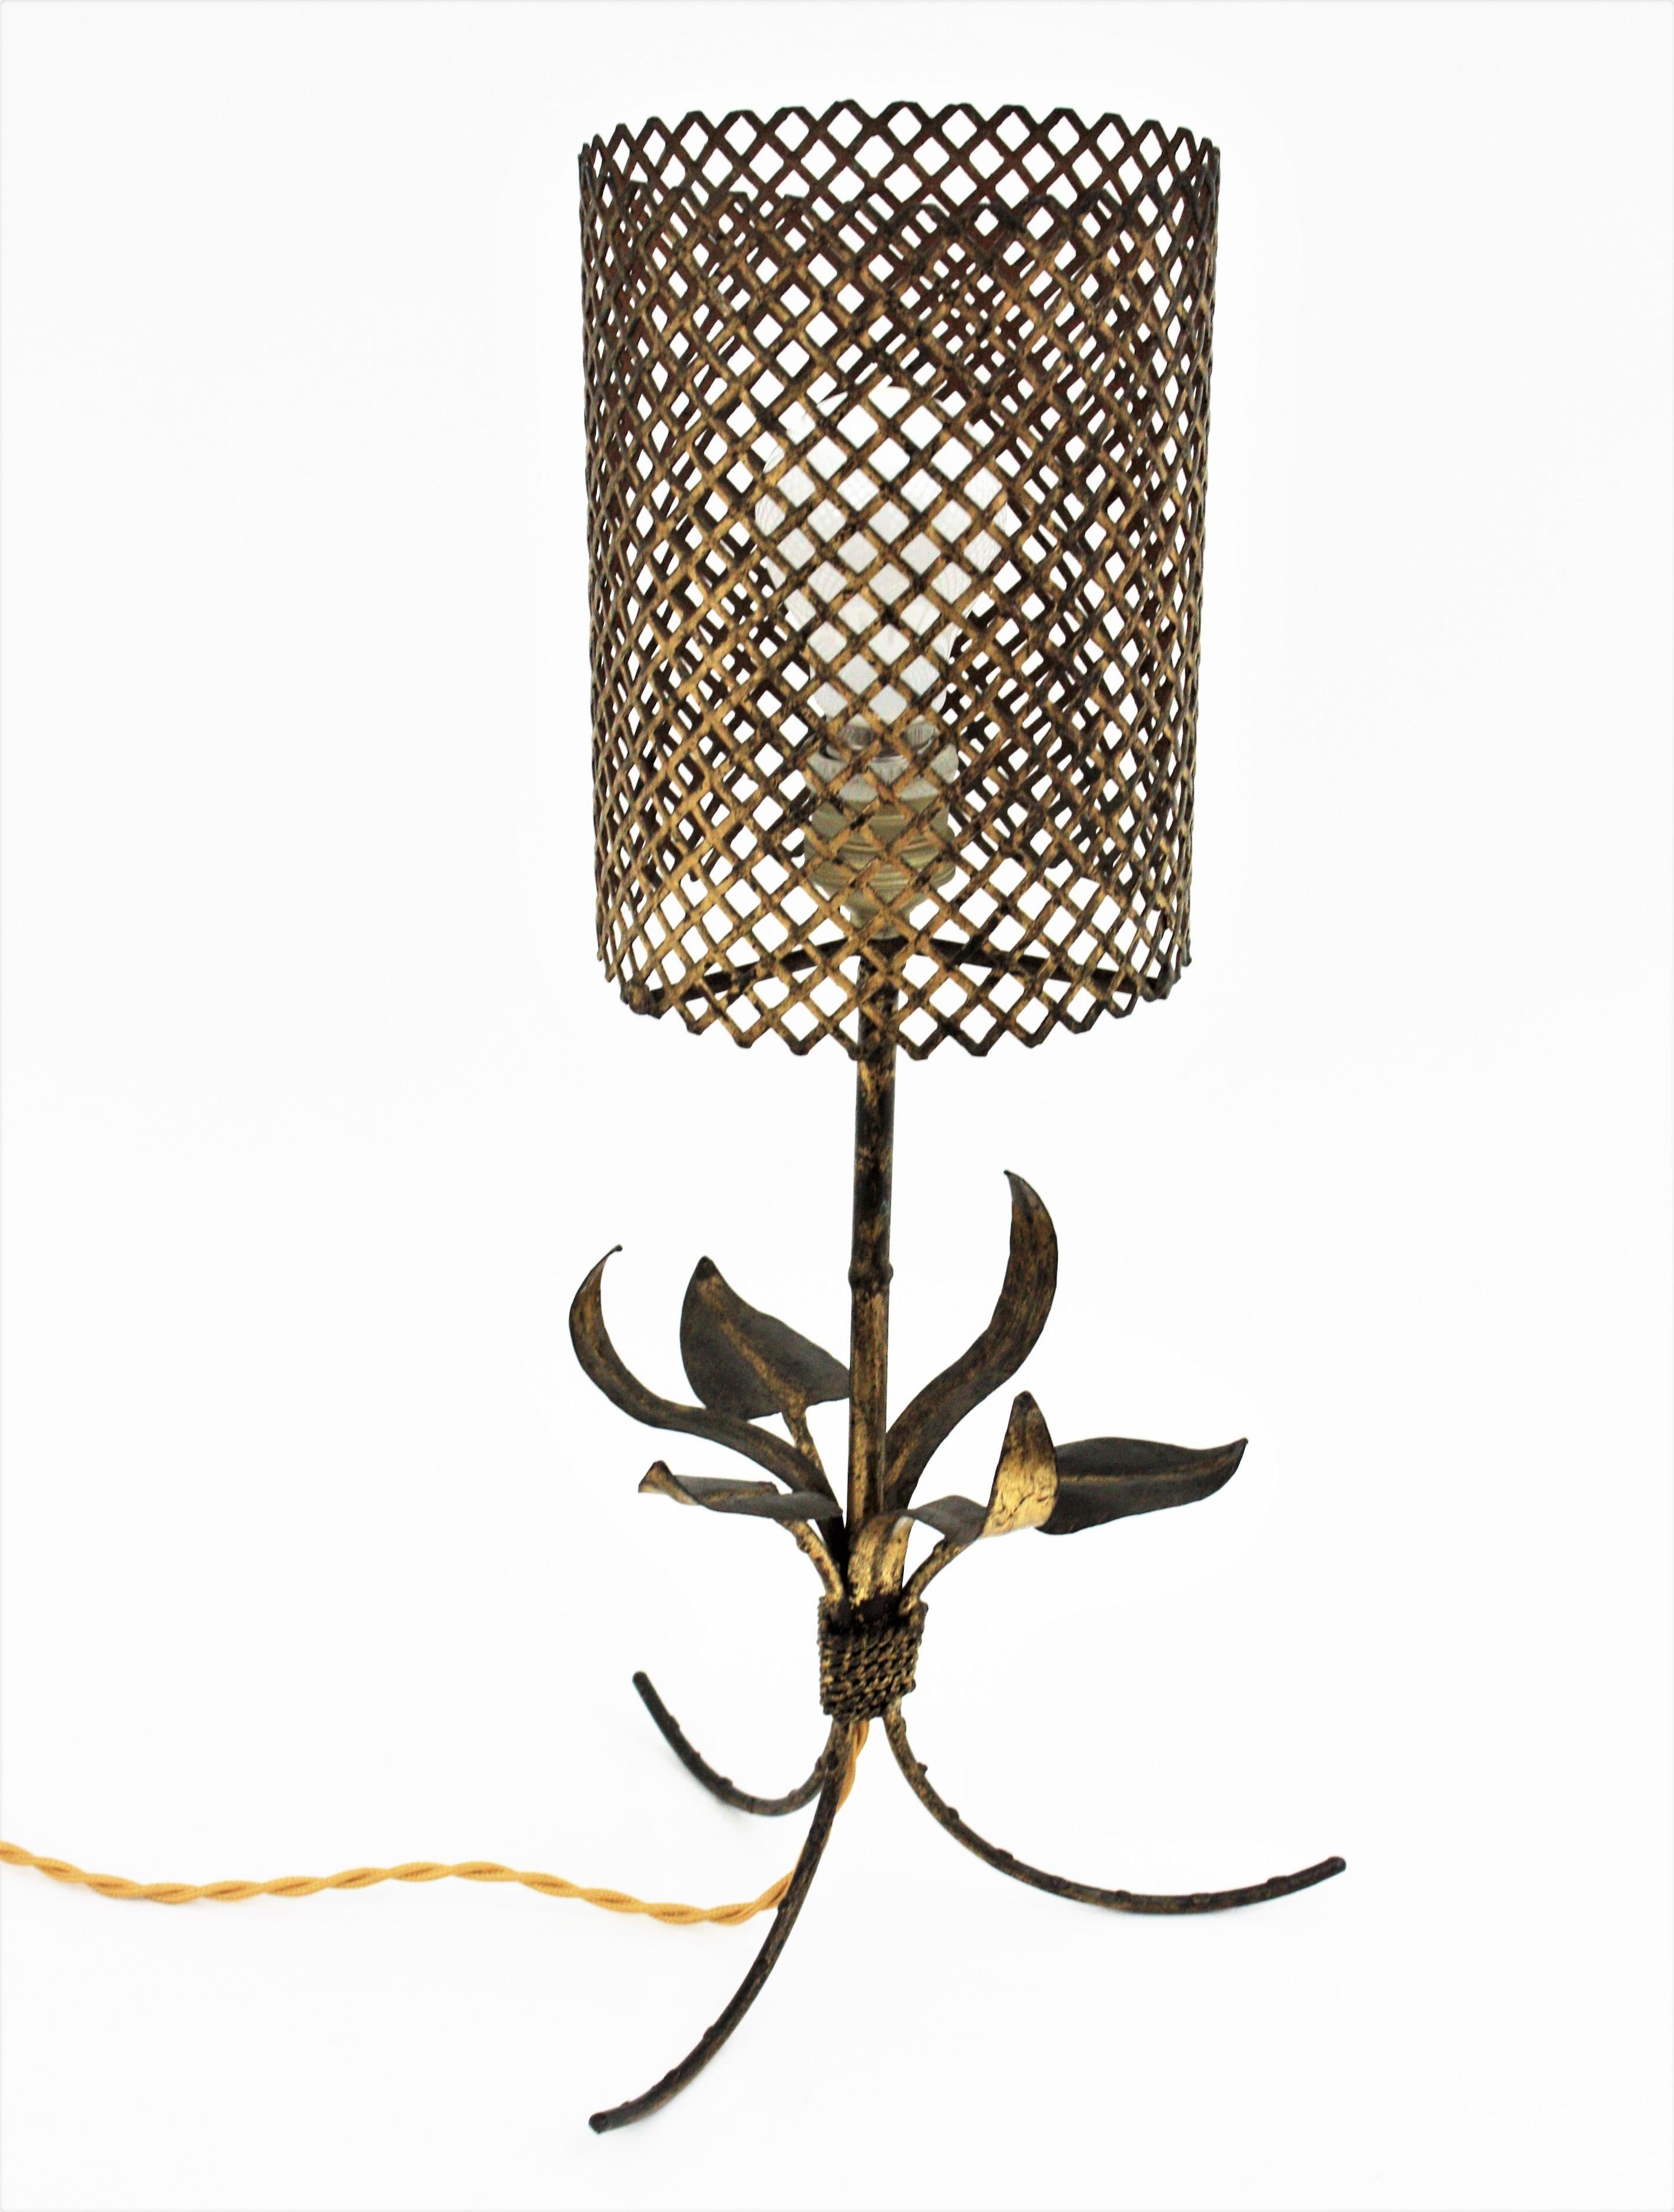 20th Century French Faux Bamboo Foliage Tripod Table Lamp in Gilt Metal, 1940s For Sale